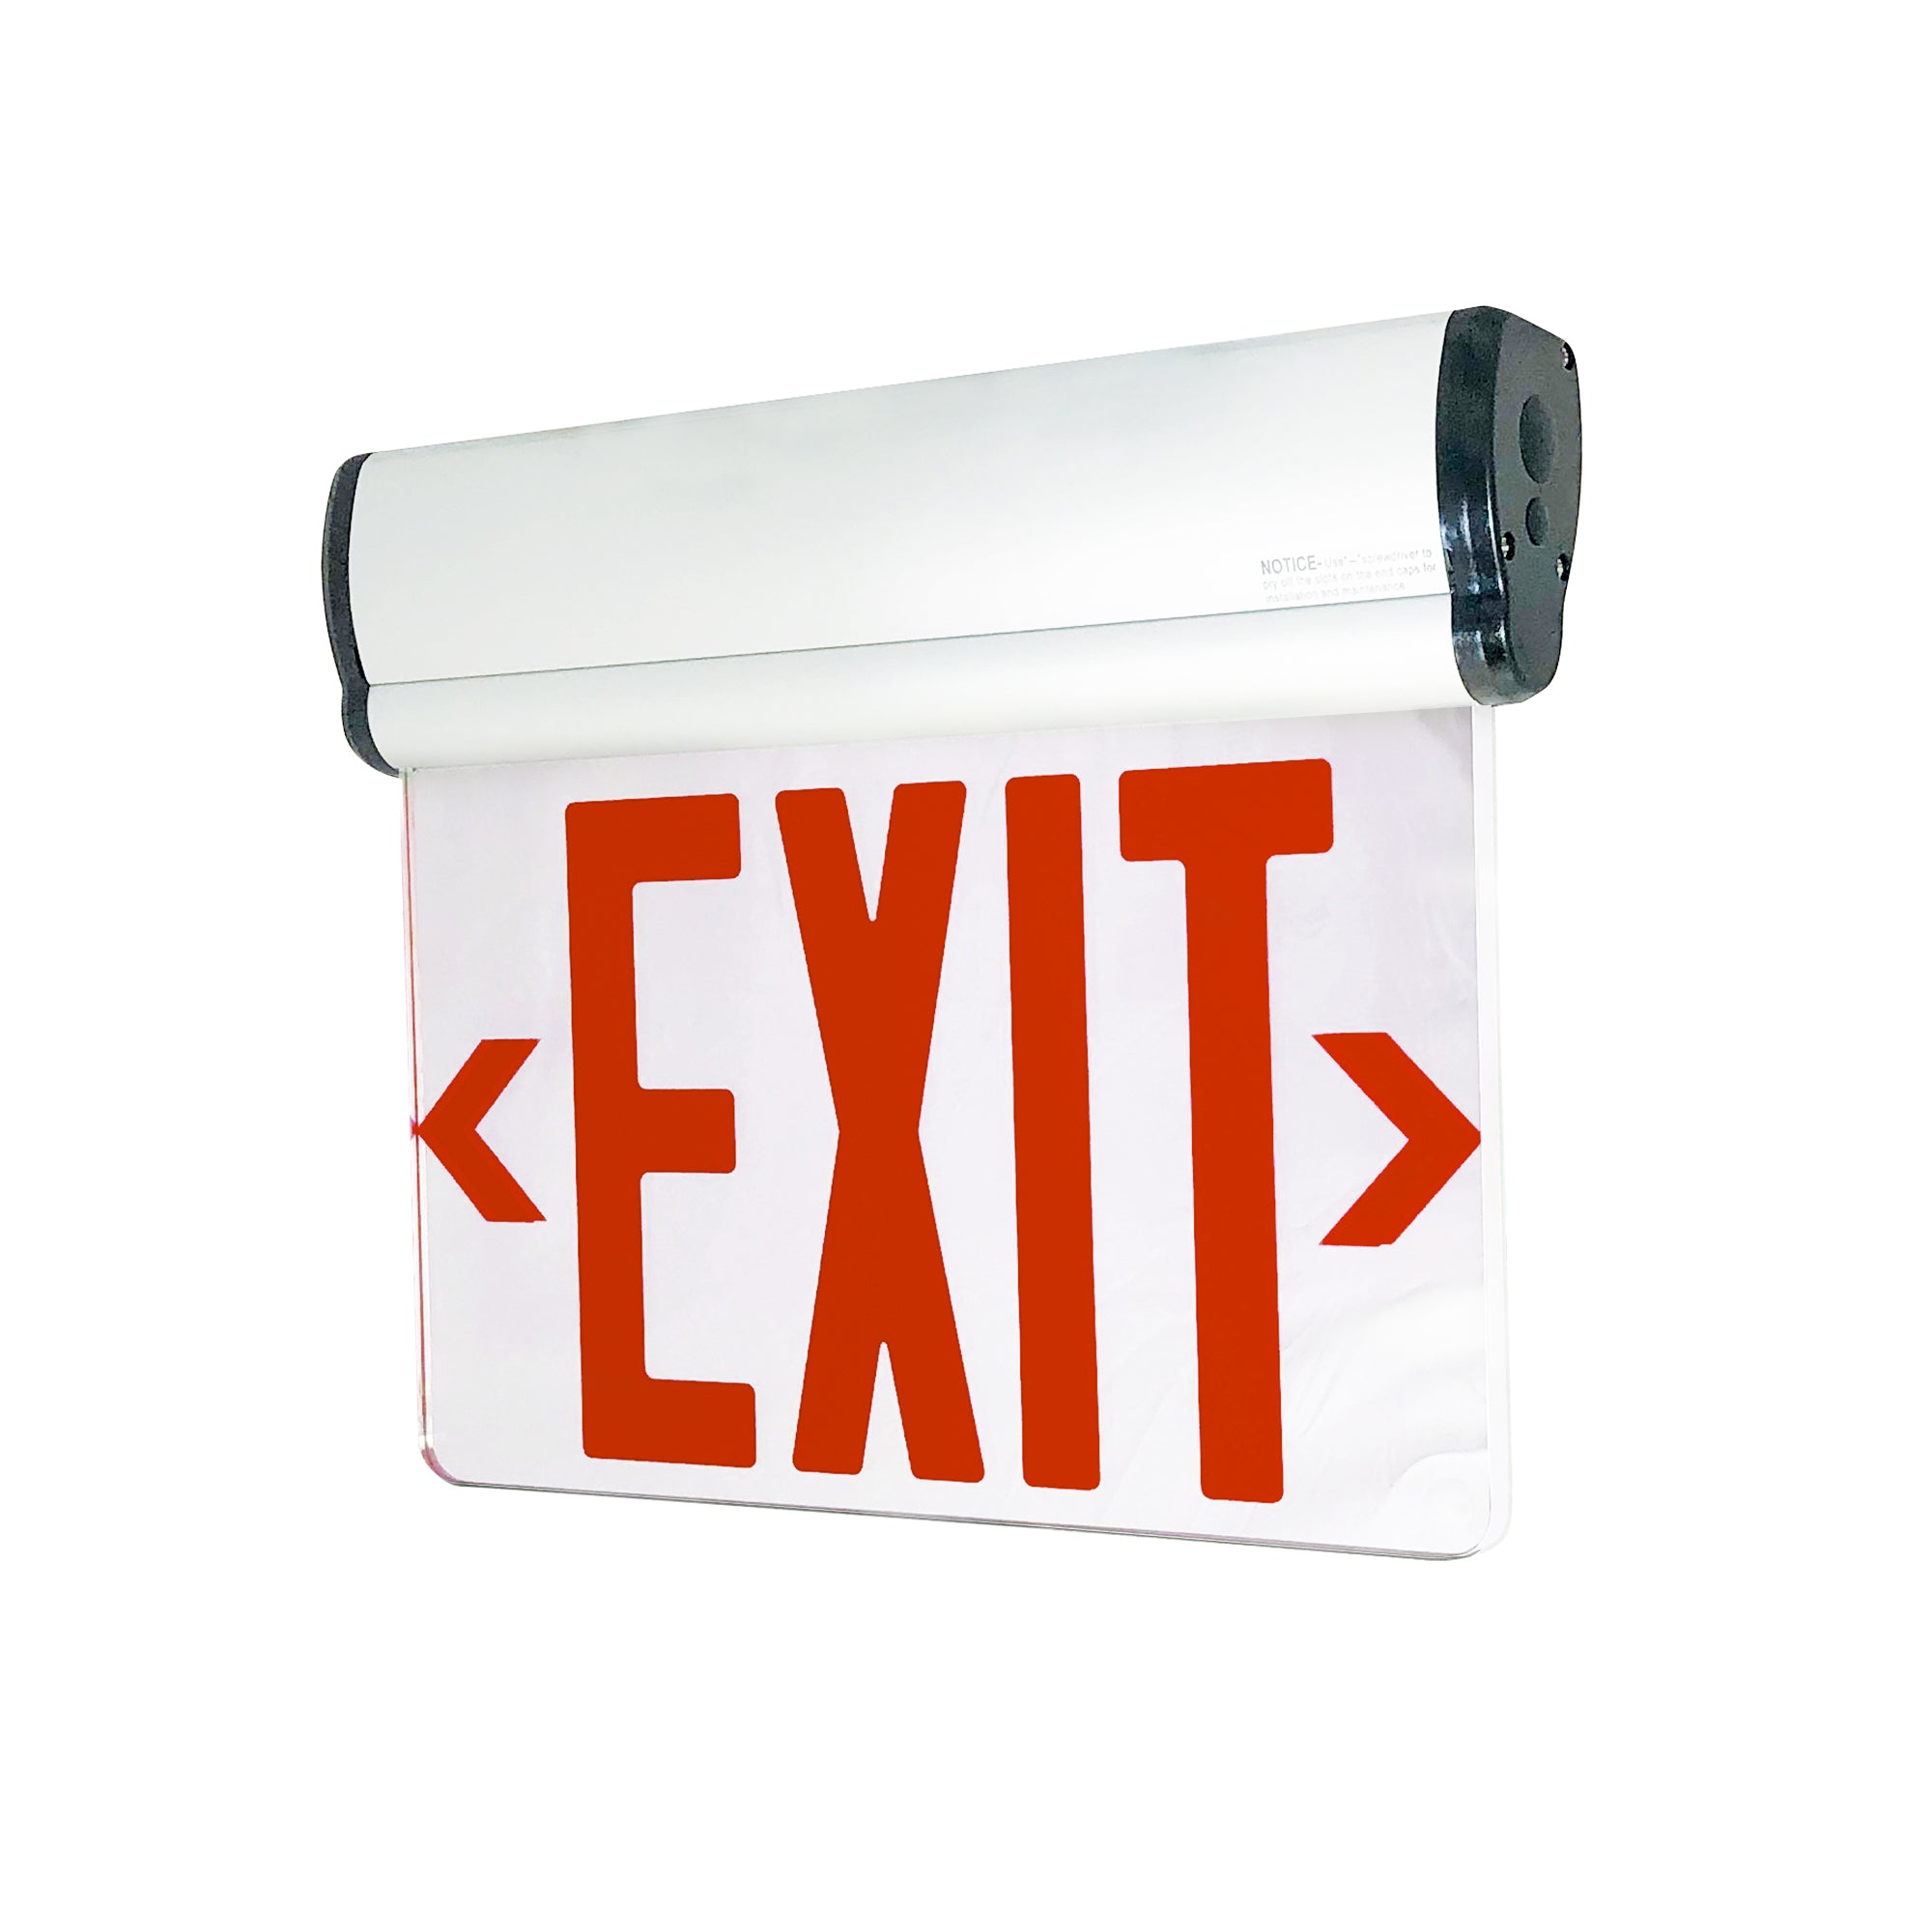 Nora Lighting NX-810-LEDRMW - Exit / Emergency - Surface Adjustable LED Edge-Lit Exit Sign, AC Only, 6 Inch Red Letters, Single Face / Mirrored Acrylic, White Housing